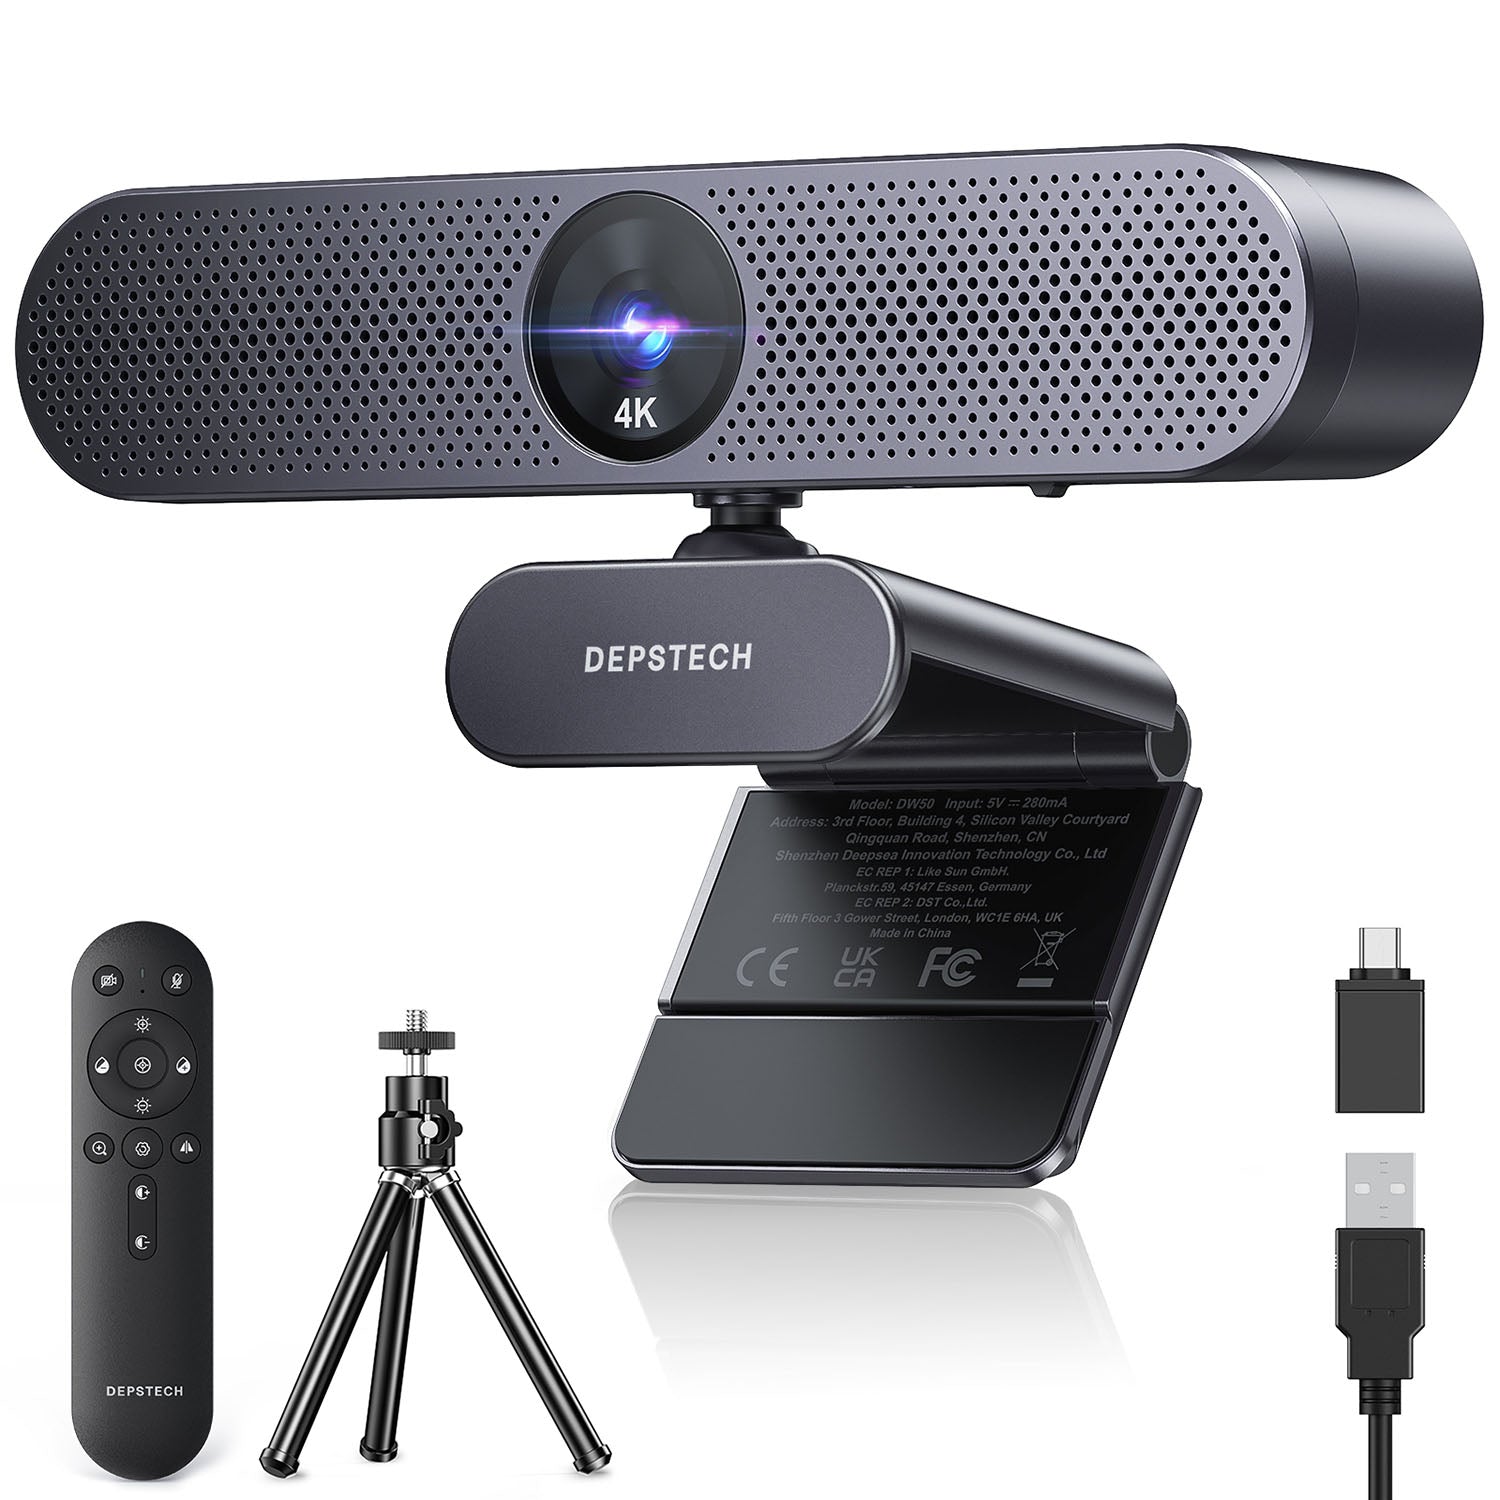 4K Webcam with Microphone and Remote, 3X Digital Zoom, Noise-Canceling Mics